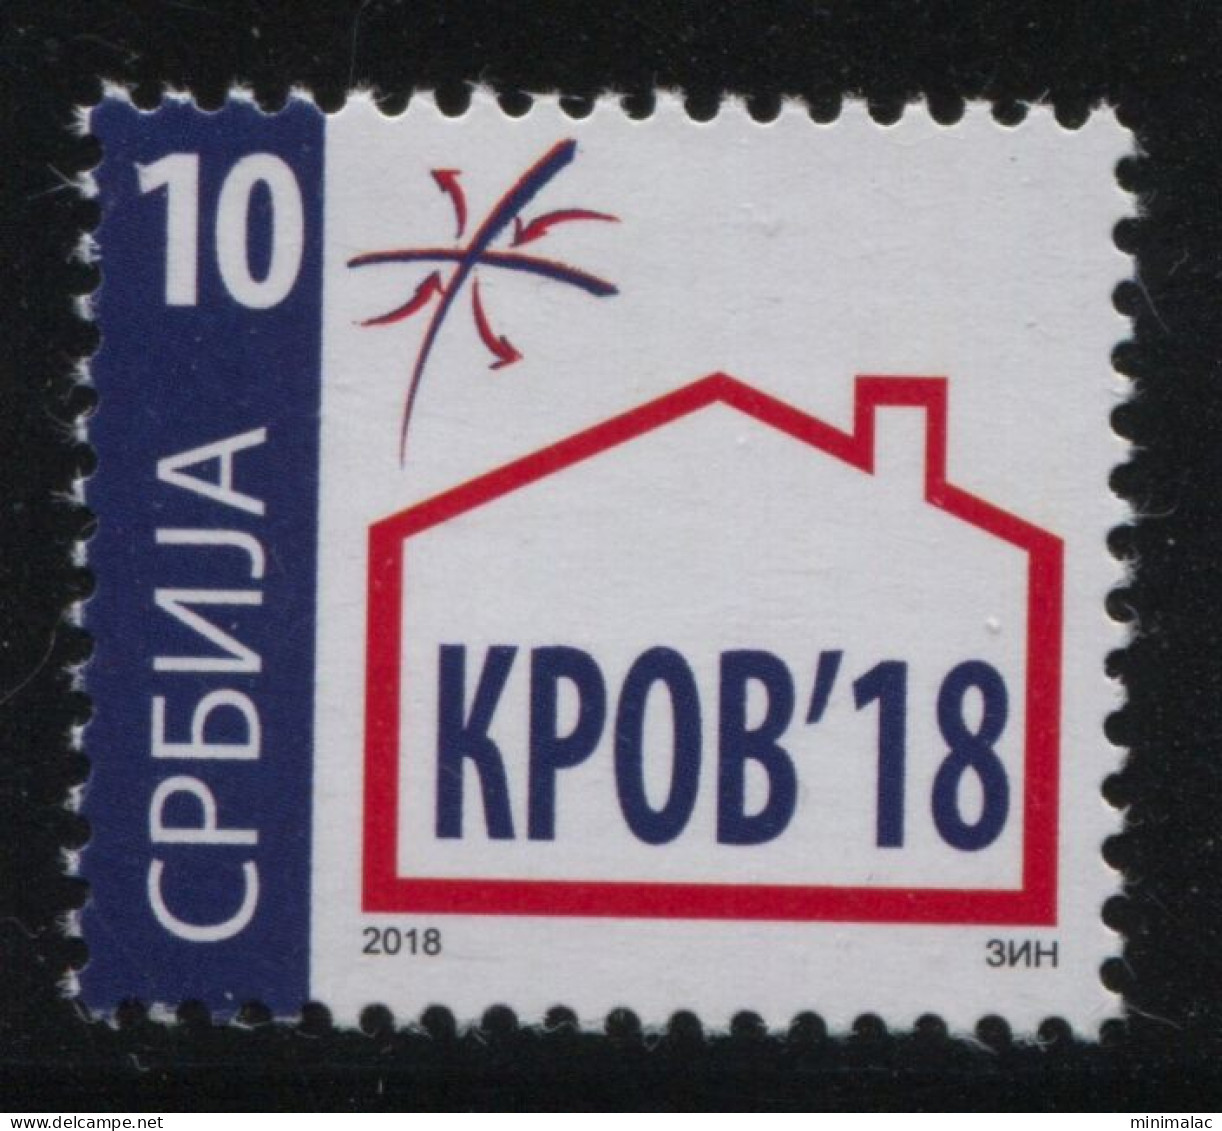 Serbia 2018, Roof For Refugees, Charity Stamp, Additional Stamp 10d, MNH - Serbie